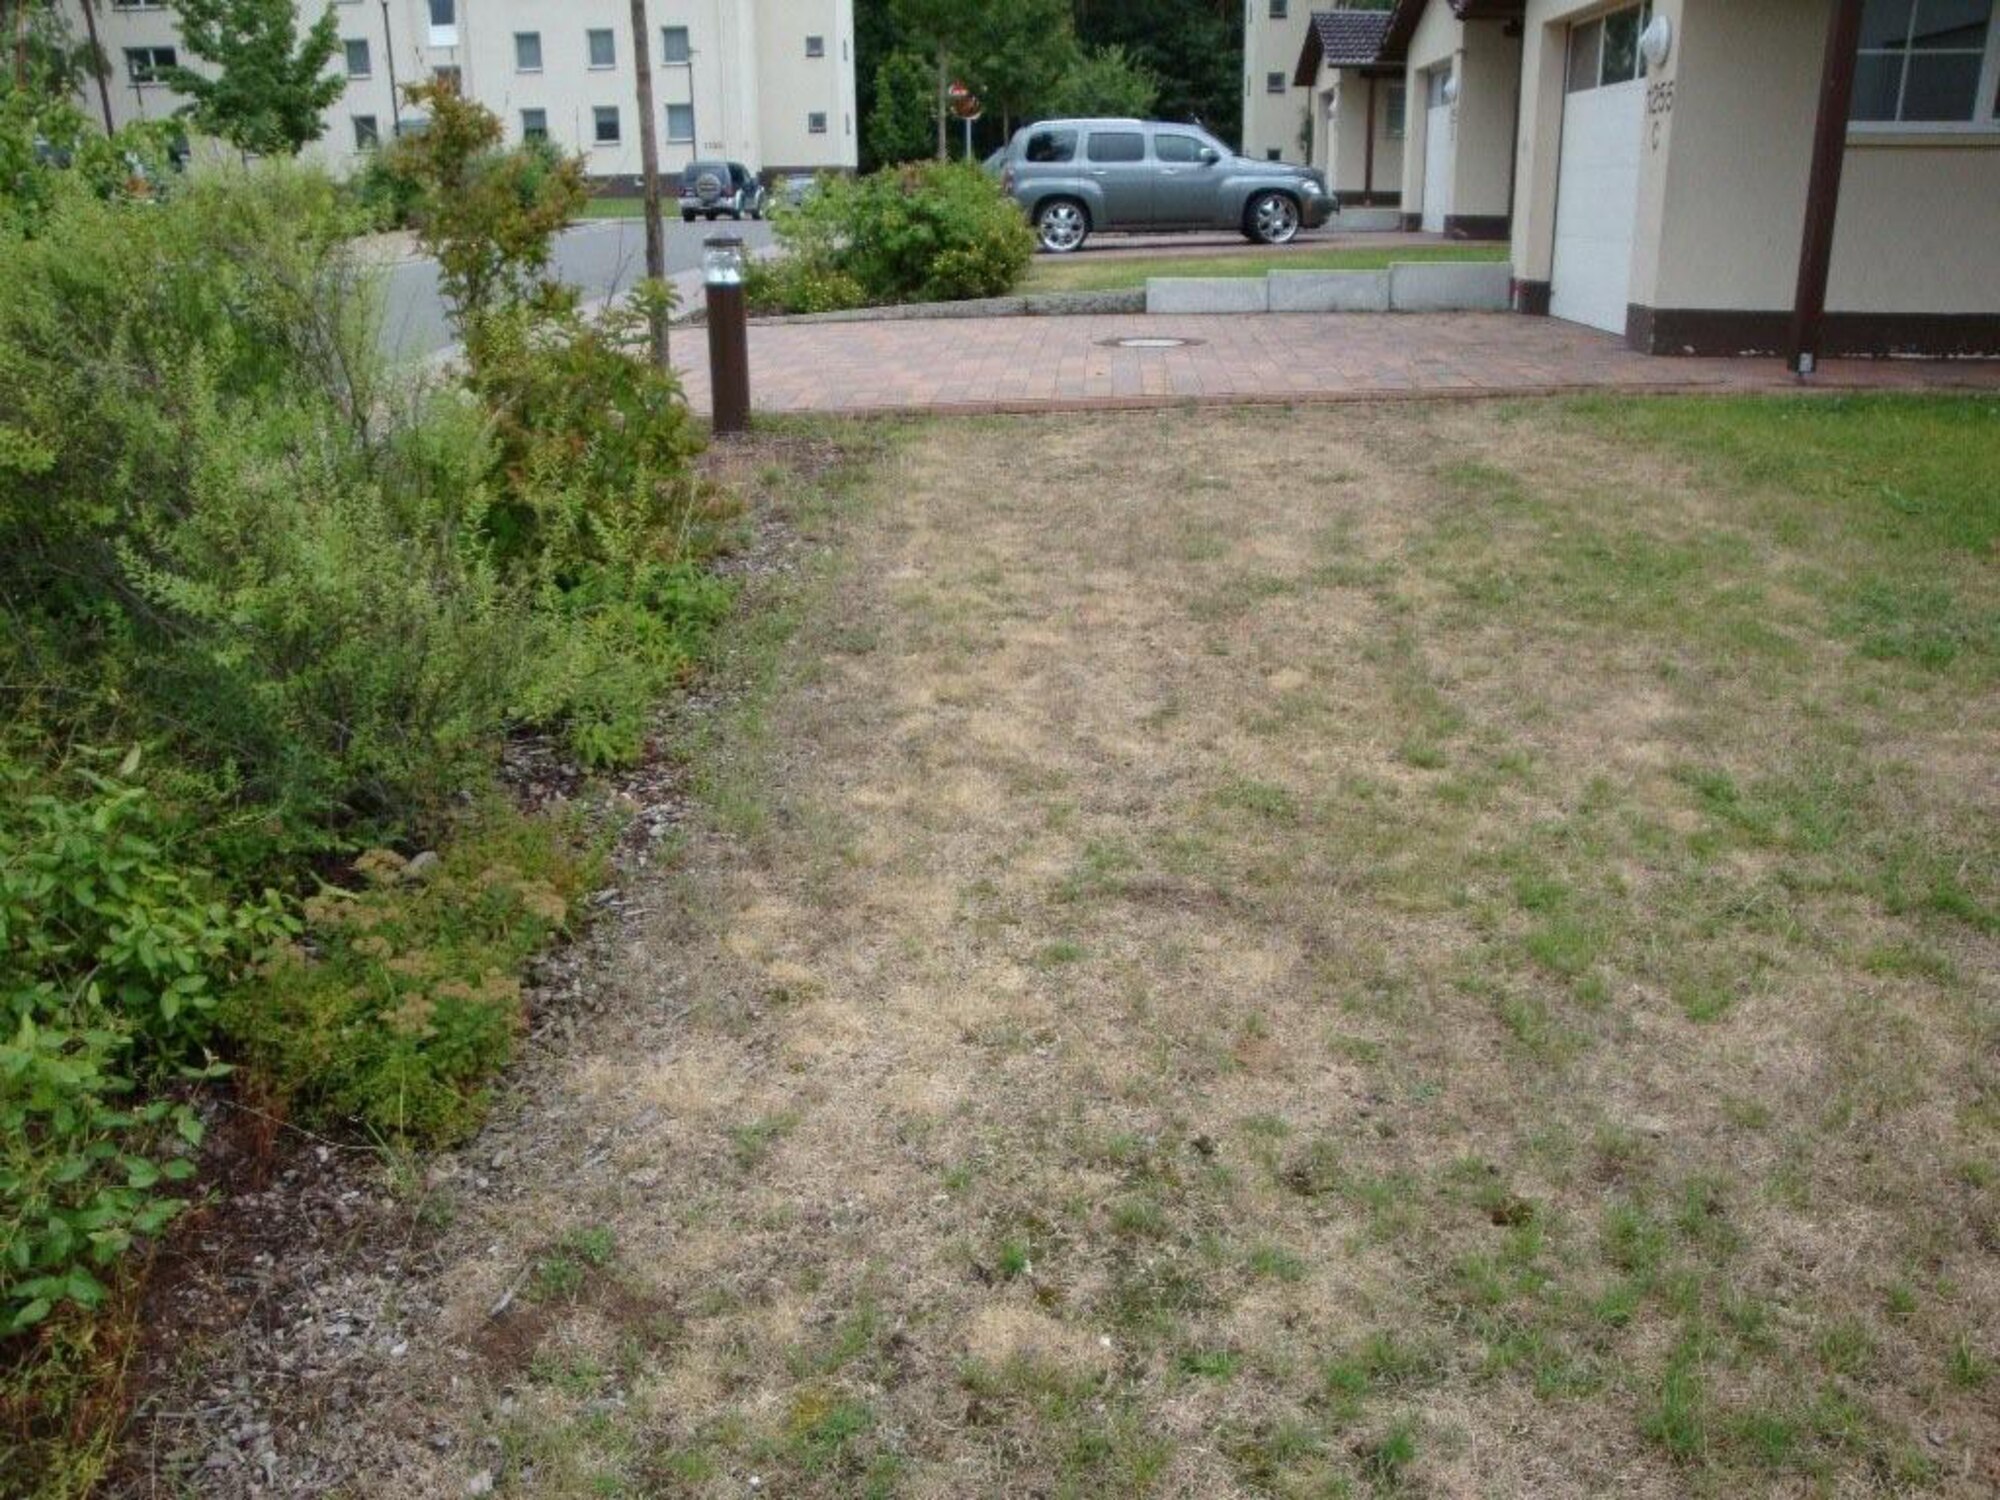 Dead grass stands waiting water in the yard of a base house in the Kaiserslautern Military Community housing area. Recently, during weekly exterior inspections, it has been noticed that some residents are not keeping their homes and yards up to standard. One such area where residents are not adhearing to the rules is exterior appearance. (Courtesy photo)